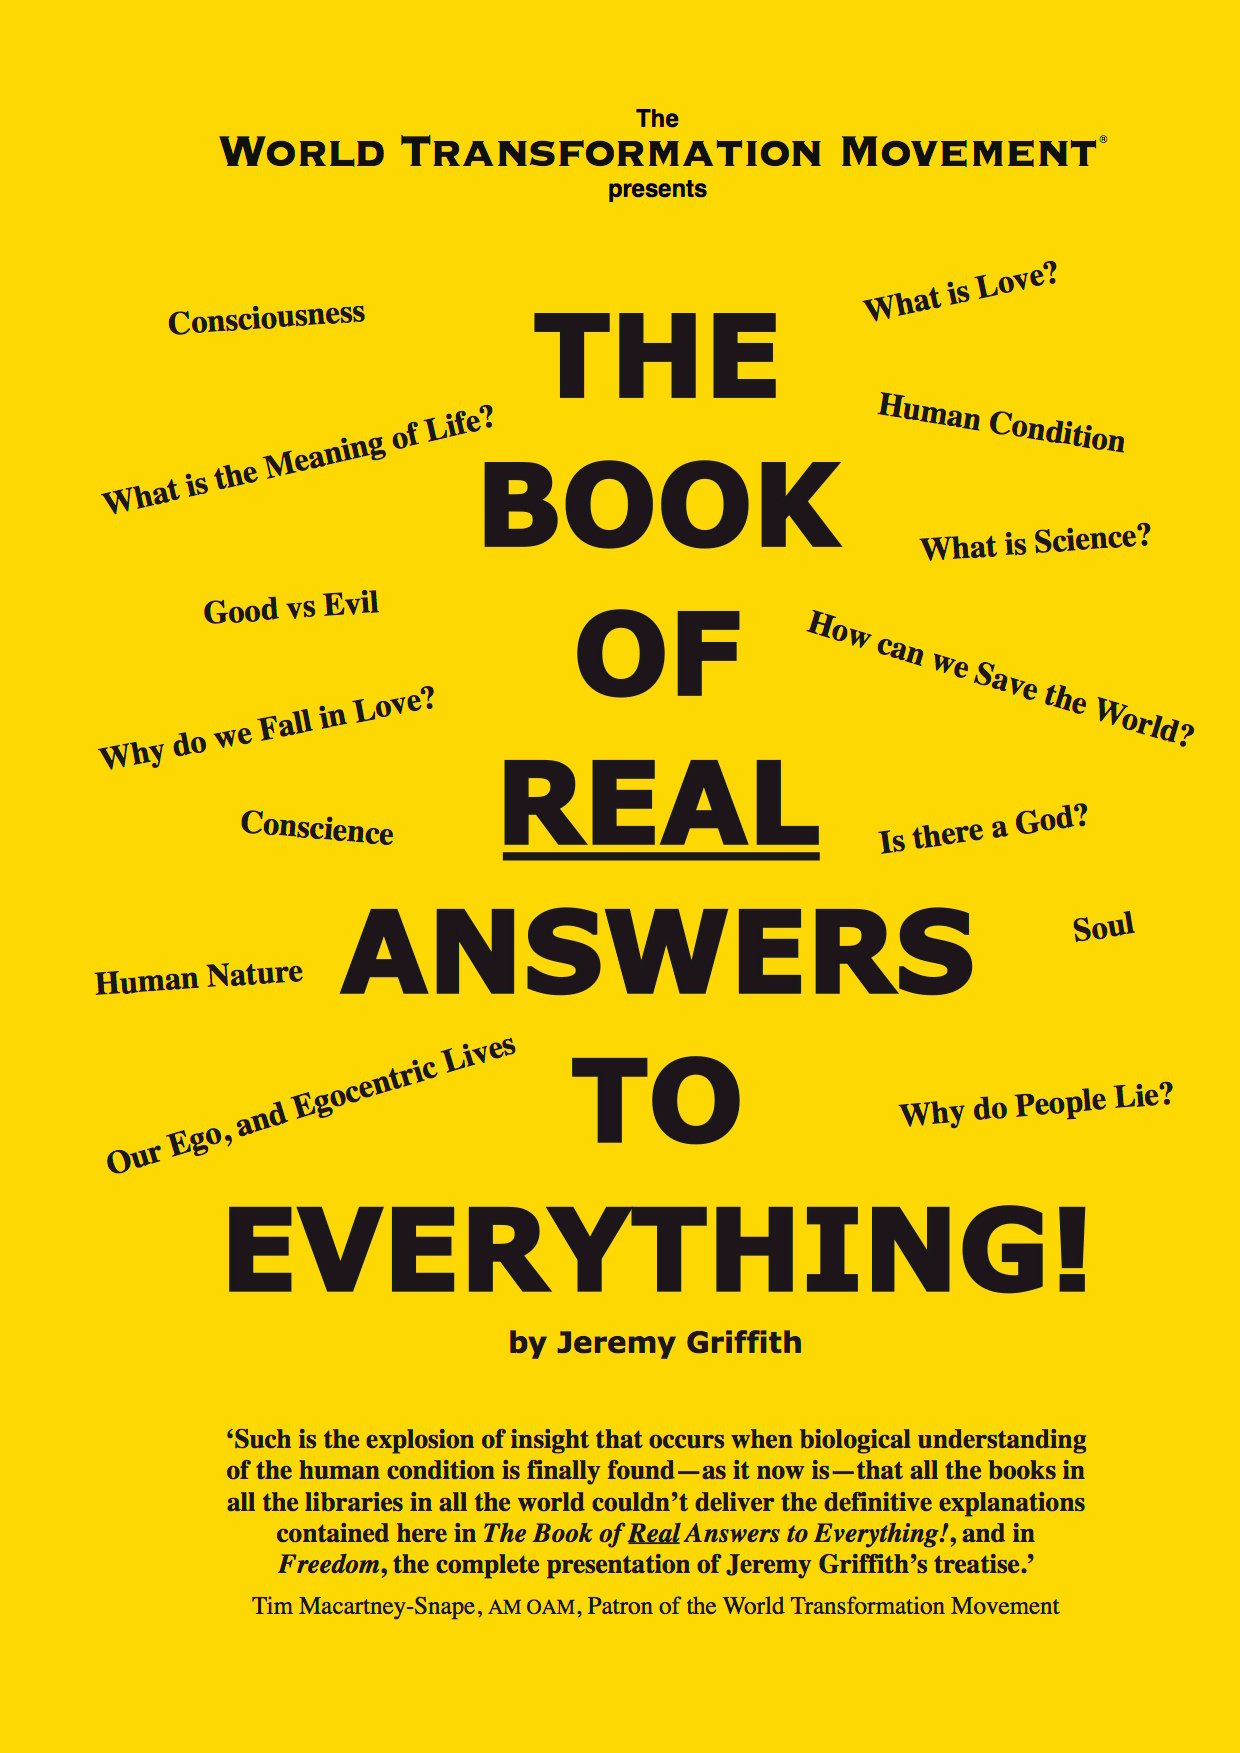 Front cover of The Book of REAL Answers to Everything, by Jeremy Griffith